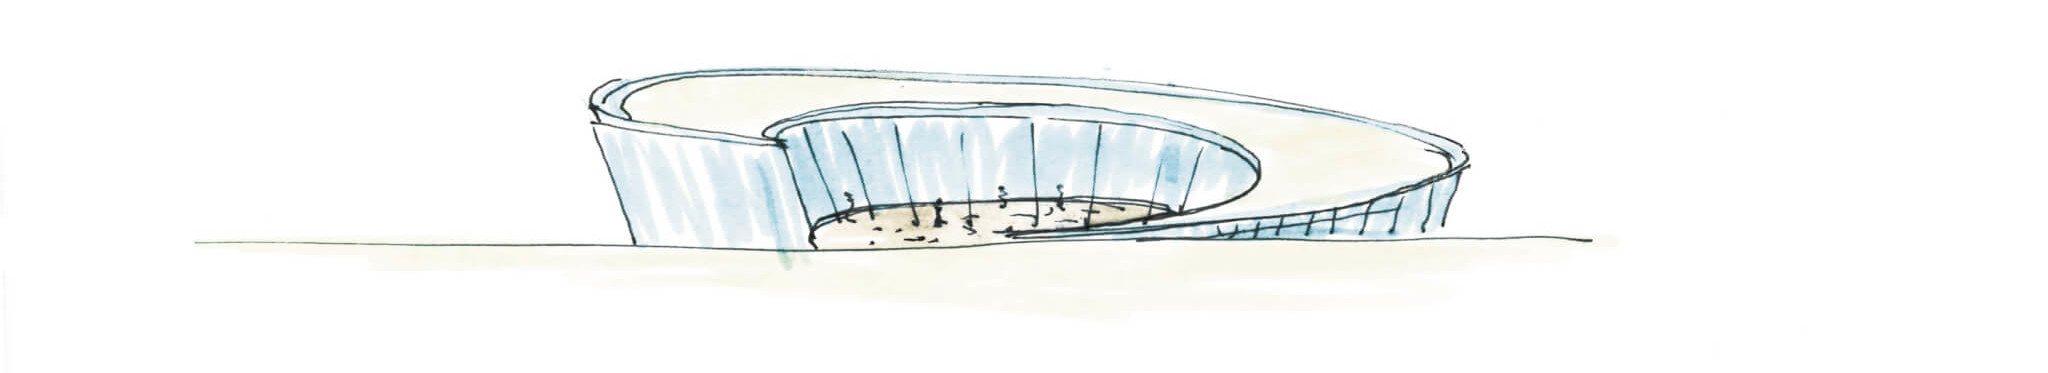 Illustration of a pointed circular building